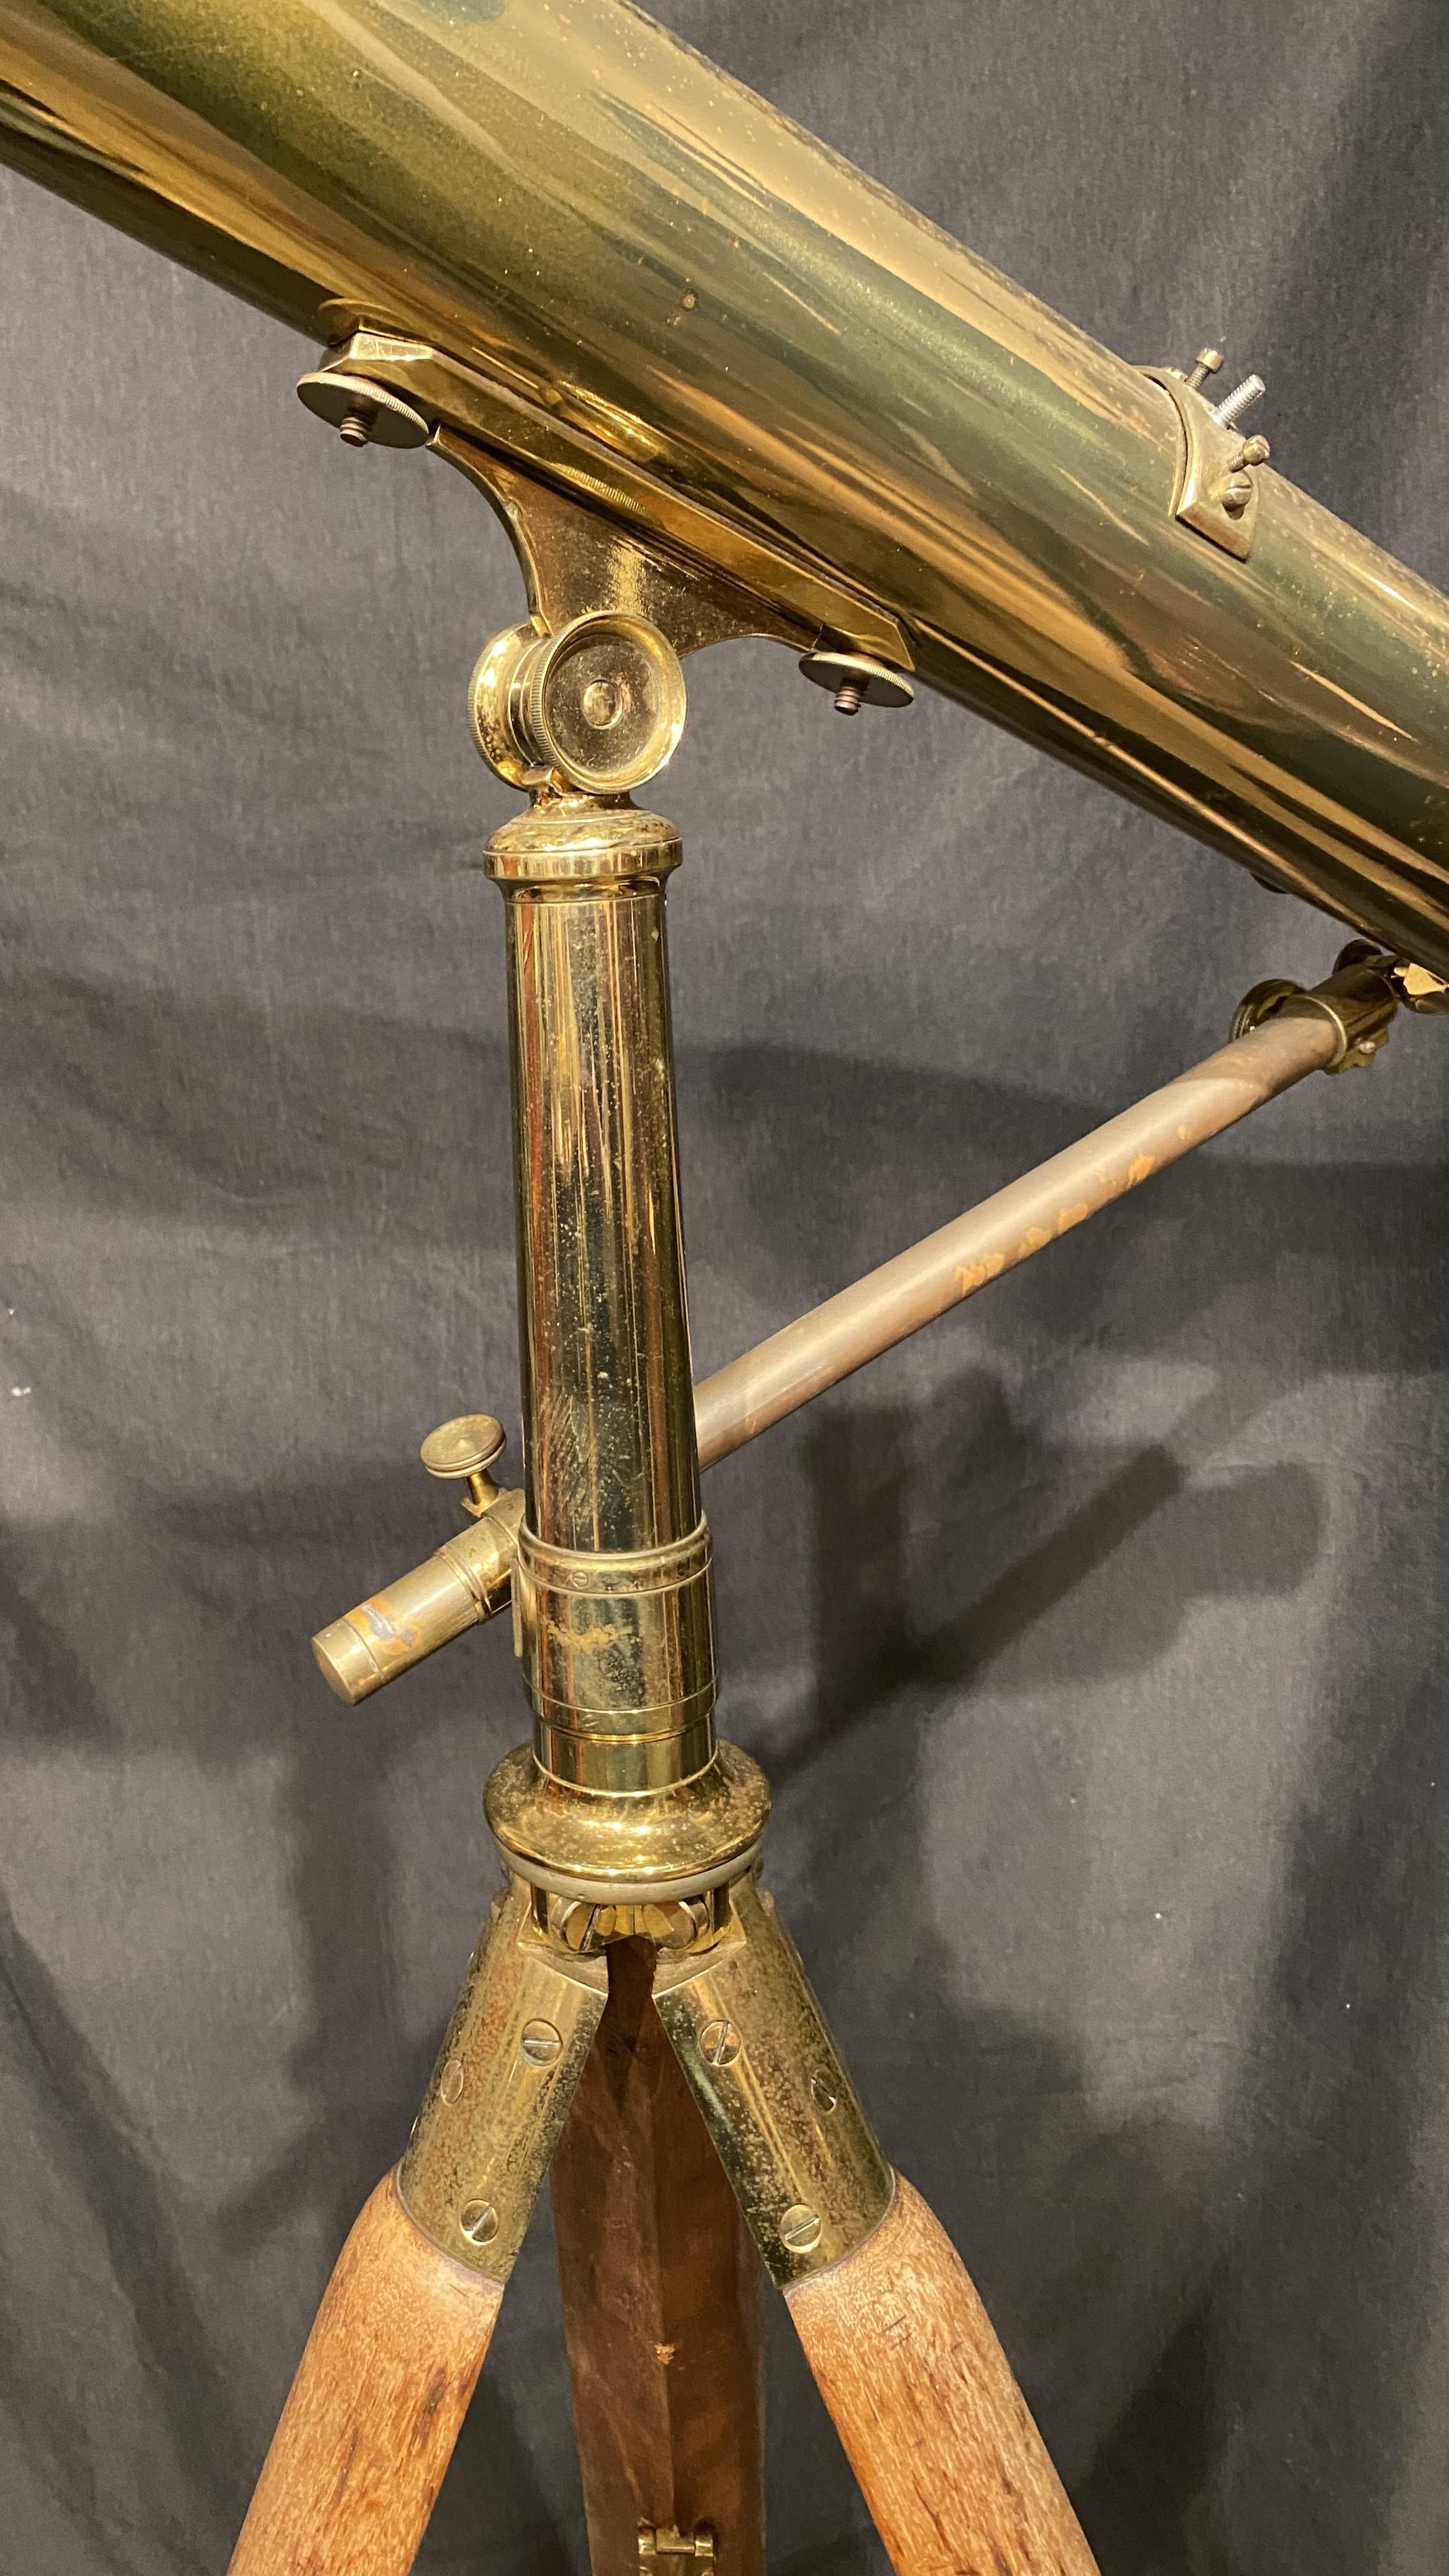 Hand-Carved 19th/20th Century Hammersley London Brass Telescope or Spyglass on Tripod